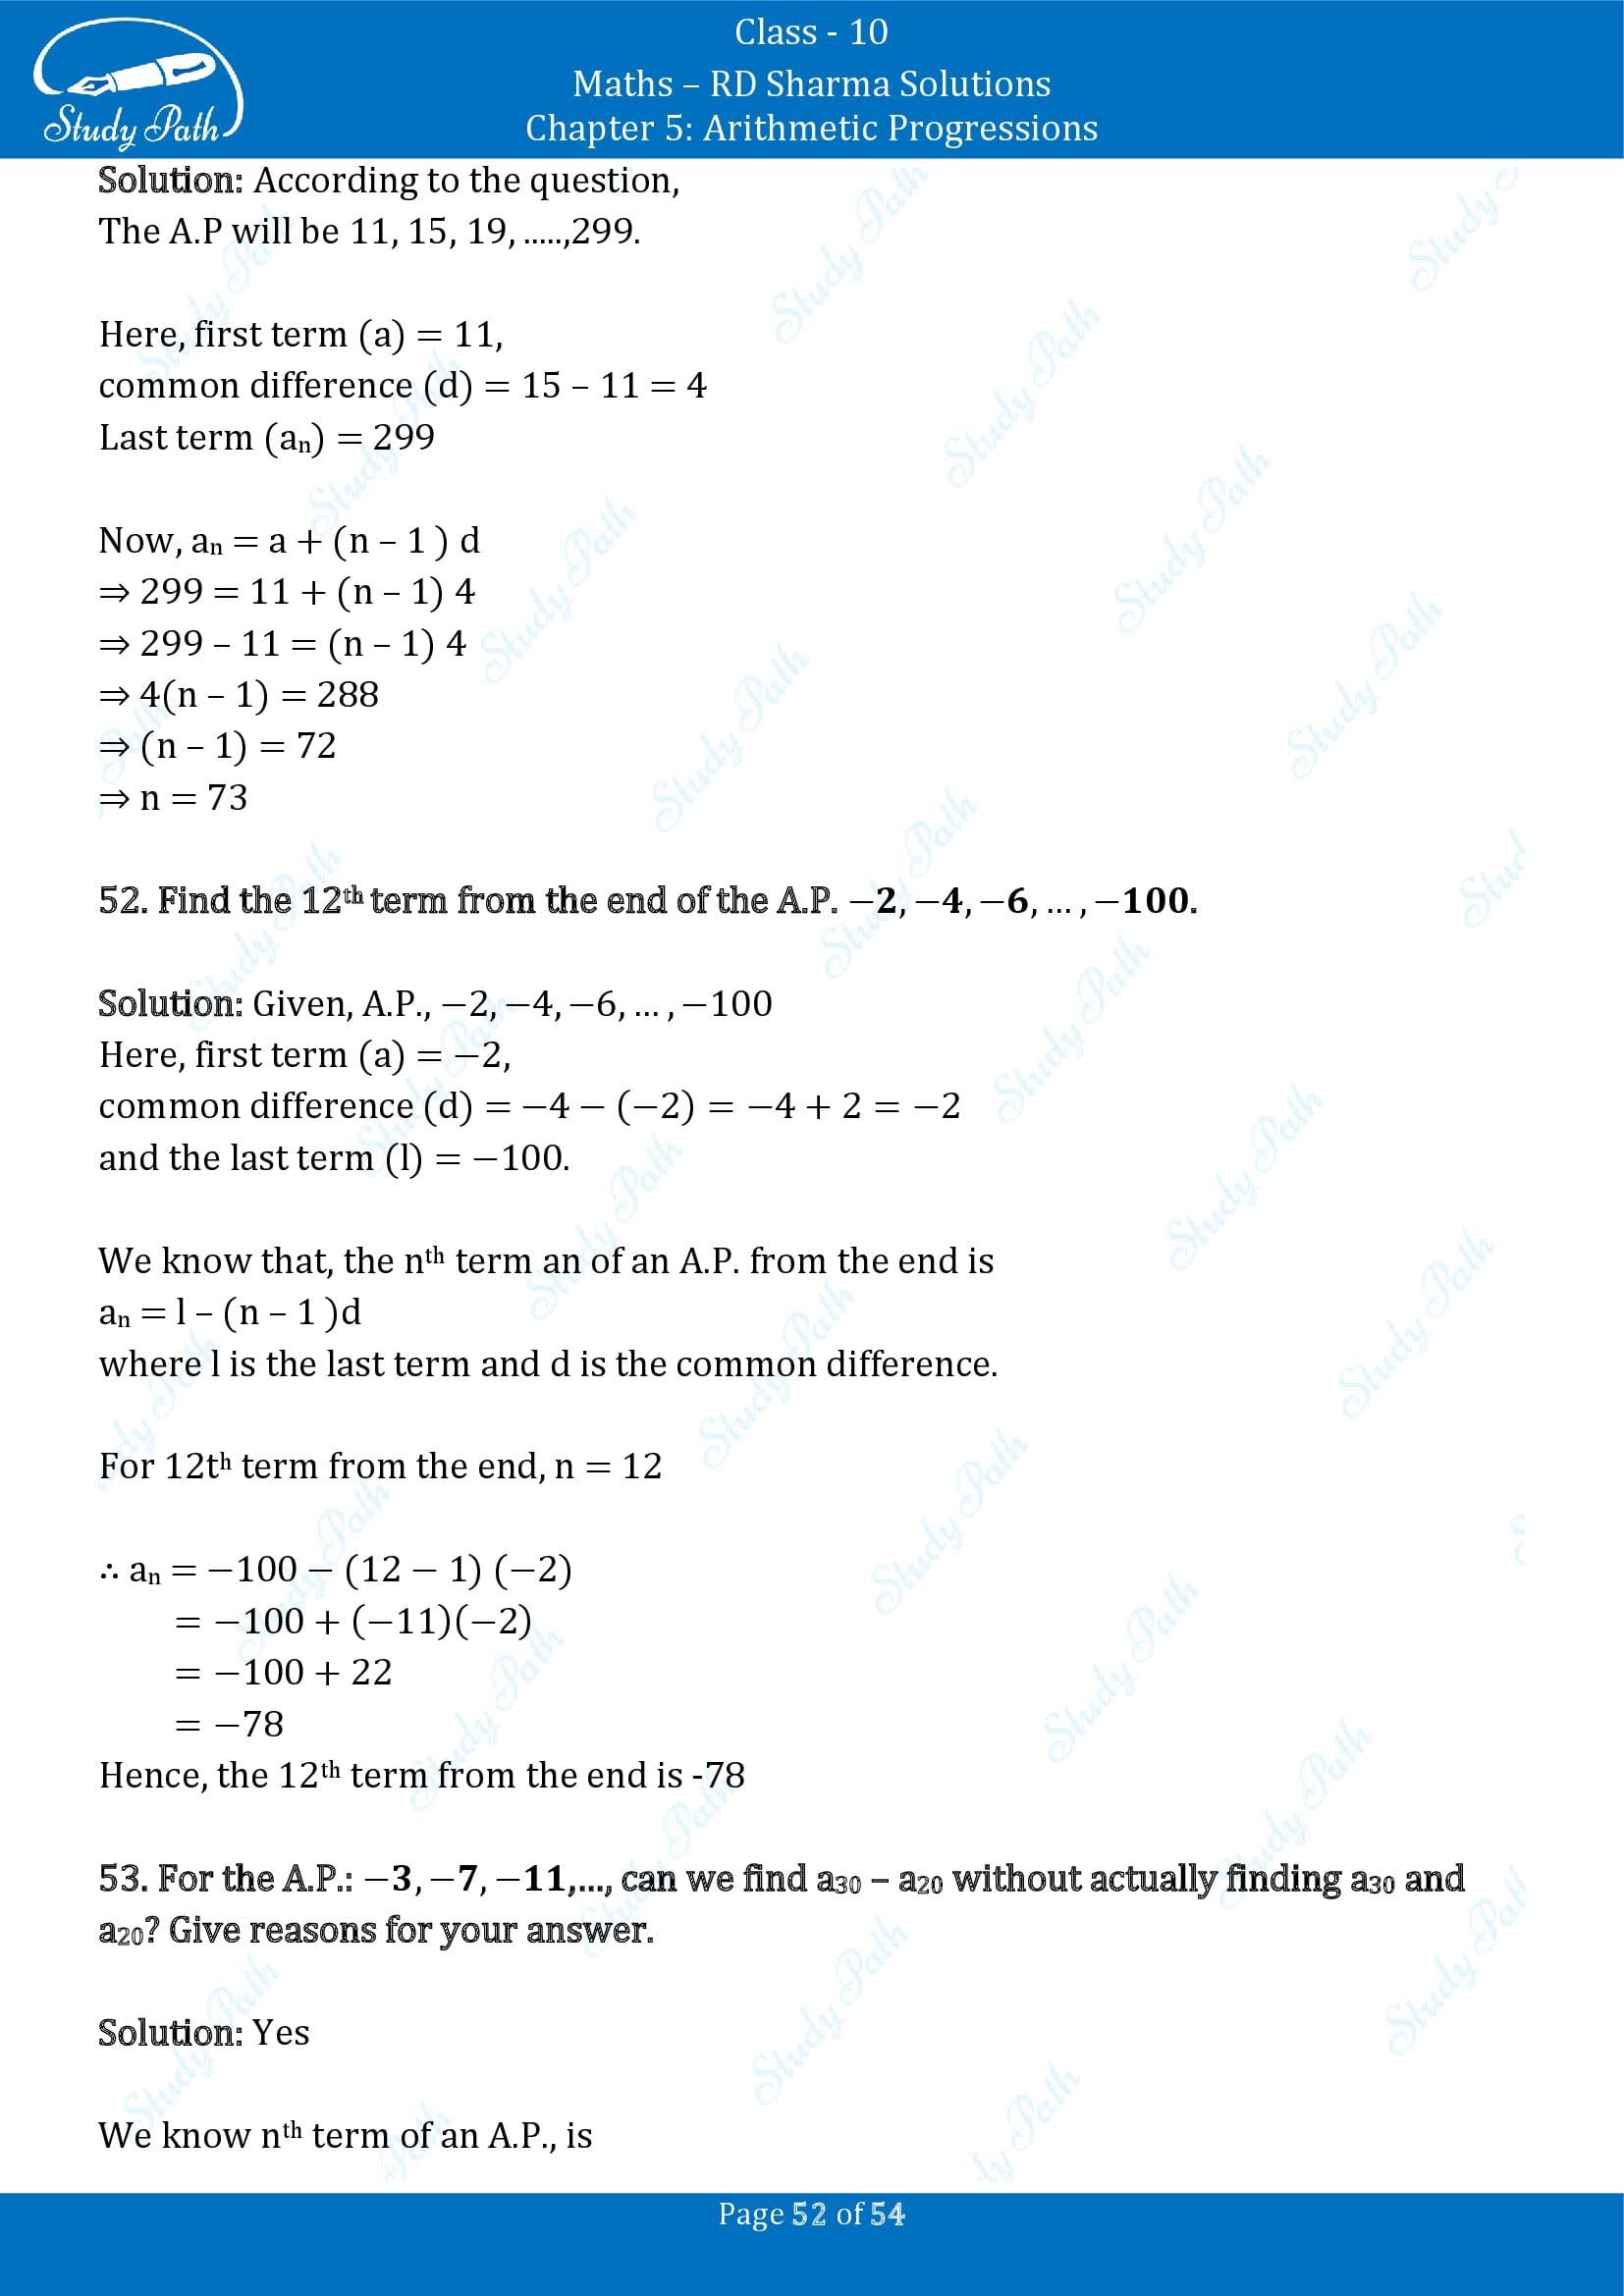 RD Sharma Solutions Class 10 Chapter 5 Arithmetic Progressions Exercise 5.4 00052